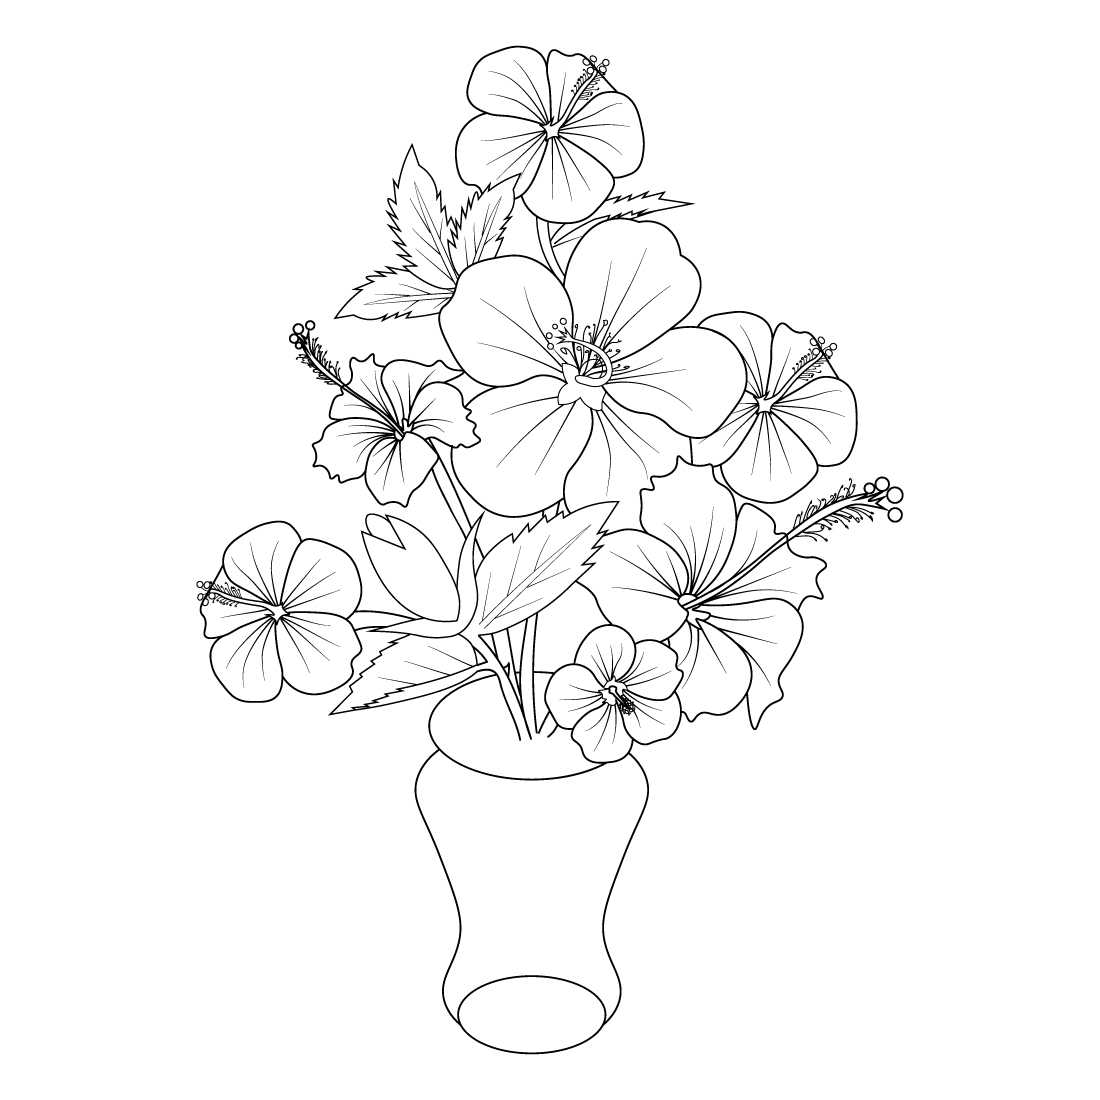 Hibiscus flower coloring pages china rose flower drawing realistic hibiscus flower coloring pages